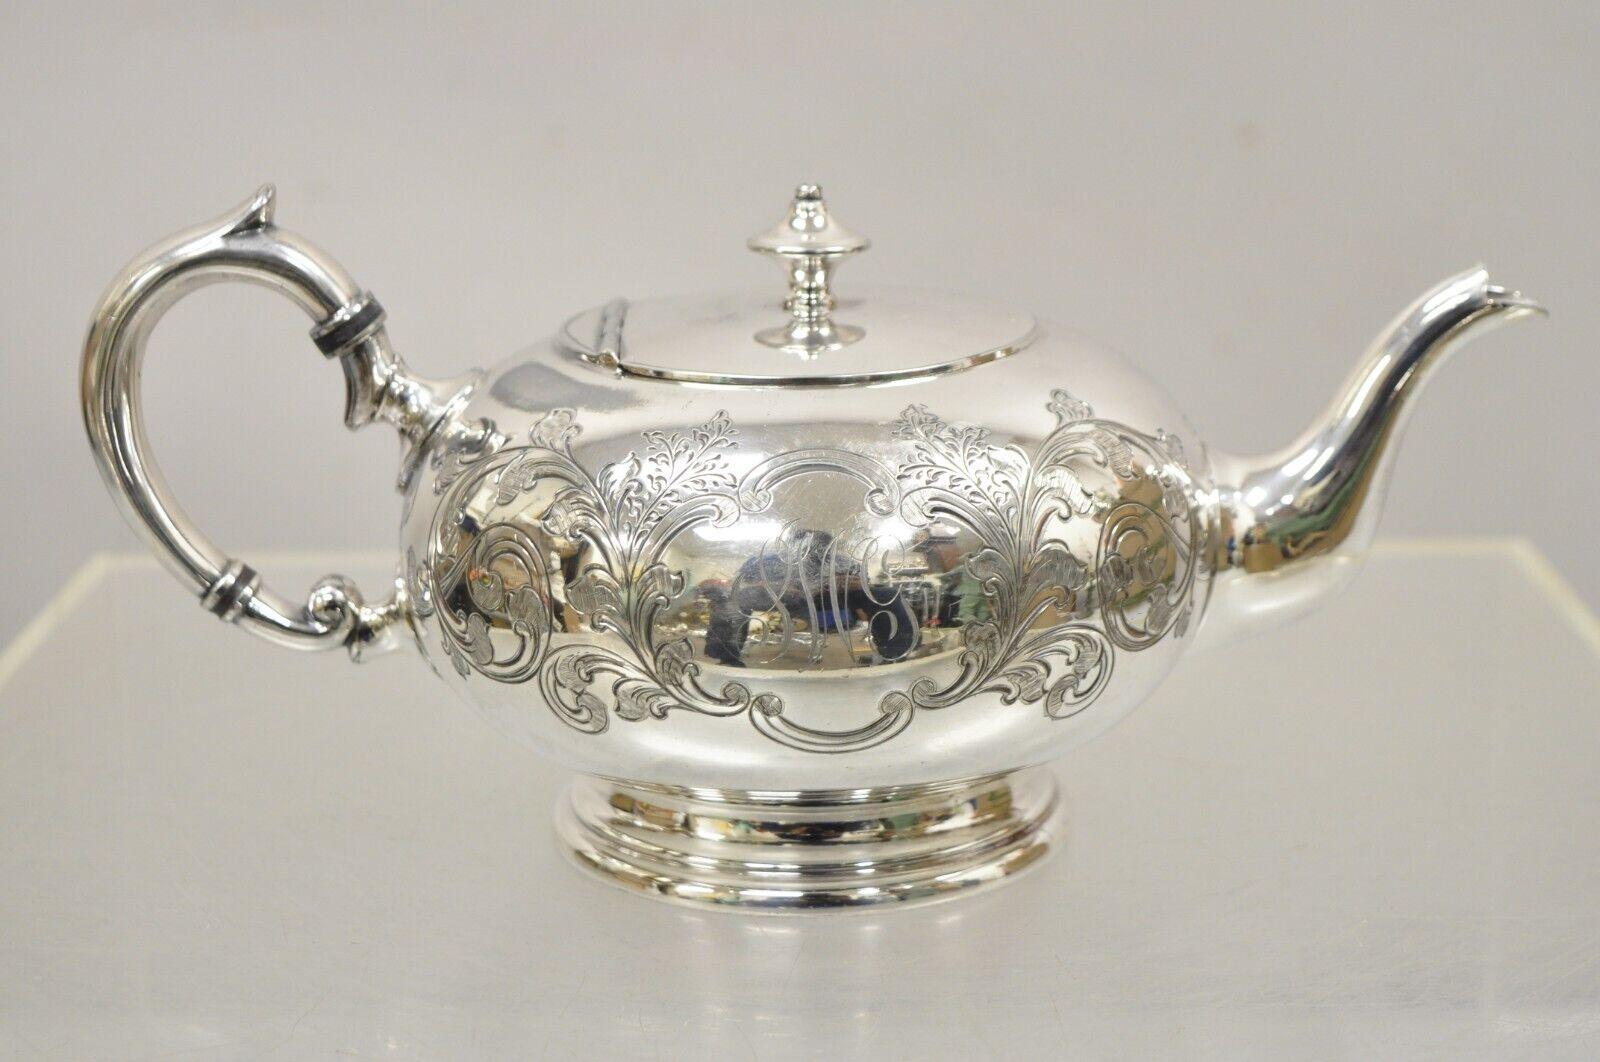 Vintage Sheffield Brimet Gladwin 2 Pint Silver Plated Tea Pot. Item features etched Monogram to side, original hall mark, ornate handle. Circa Early 20th Century. Measurements: 5